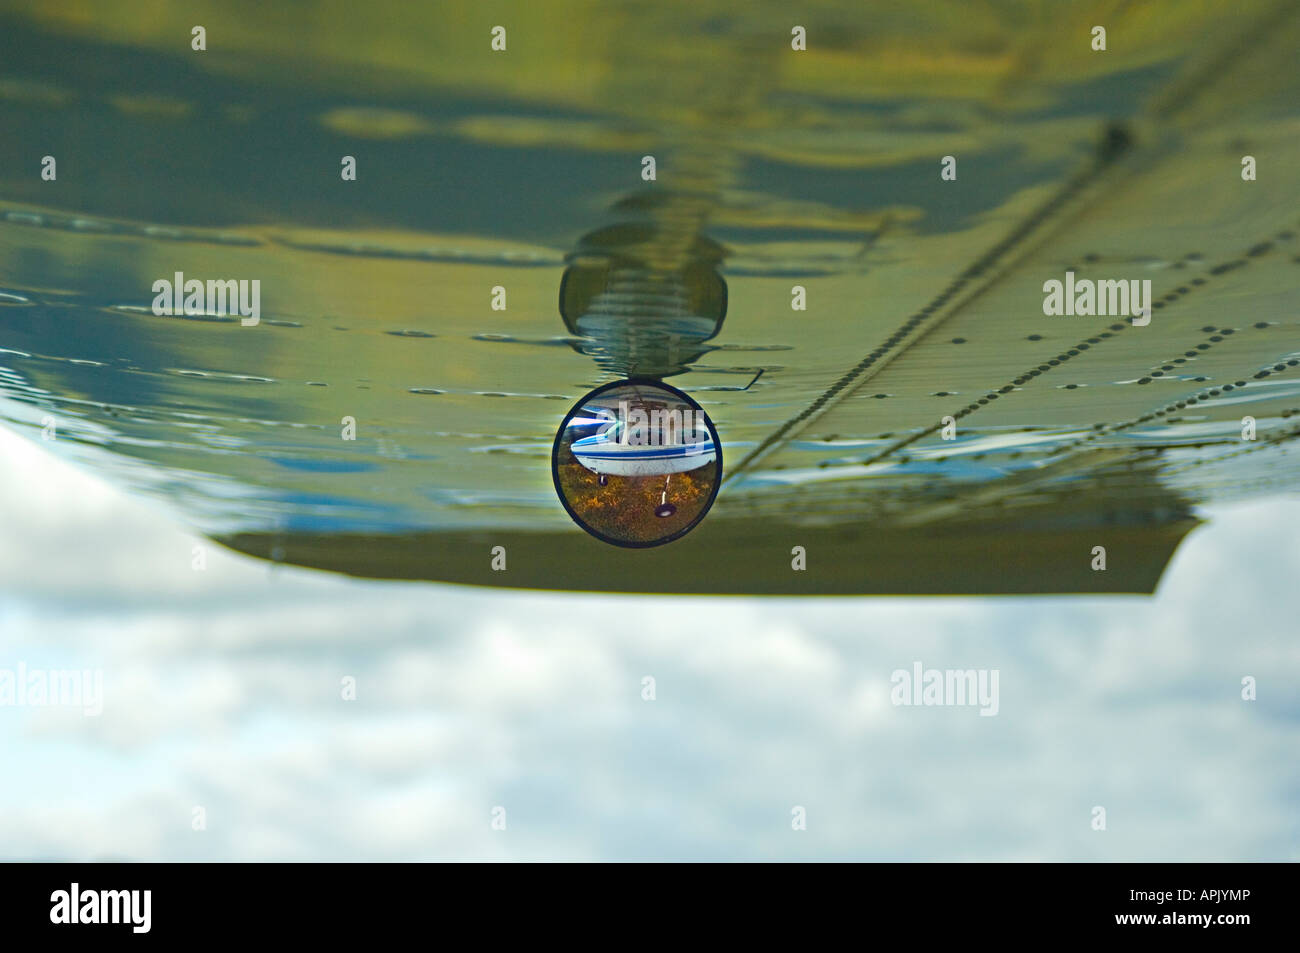 An image of under an airplane wing focusing on the mirror reflection Stock Photo